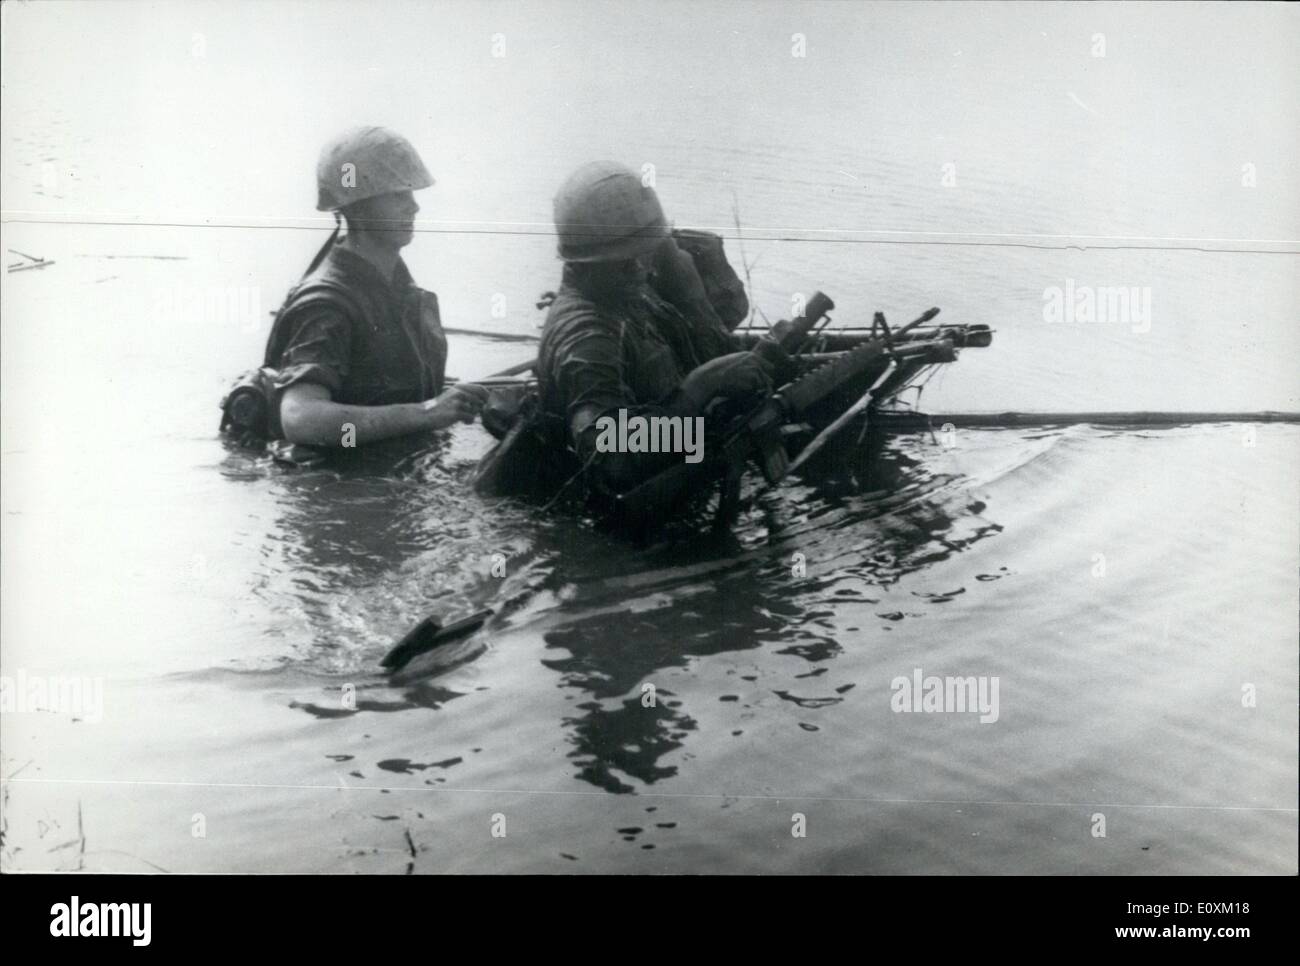 Apr. 04, 1967 - VIETNAM WAR. SHIPWRECKED. Two U.S. Marines struggle ashore in a Vietnam river after their sampen had sunk during the crossing due to too much top weight. They managed to salvage most of their equipment when the flimsy craft turned turtle. Stock Photo